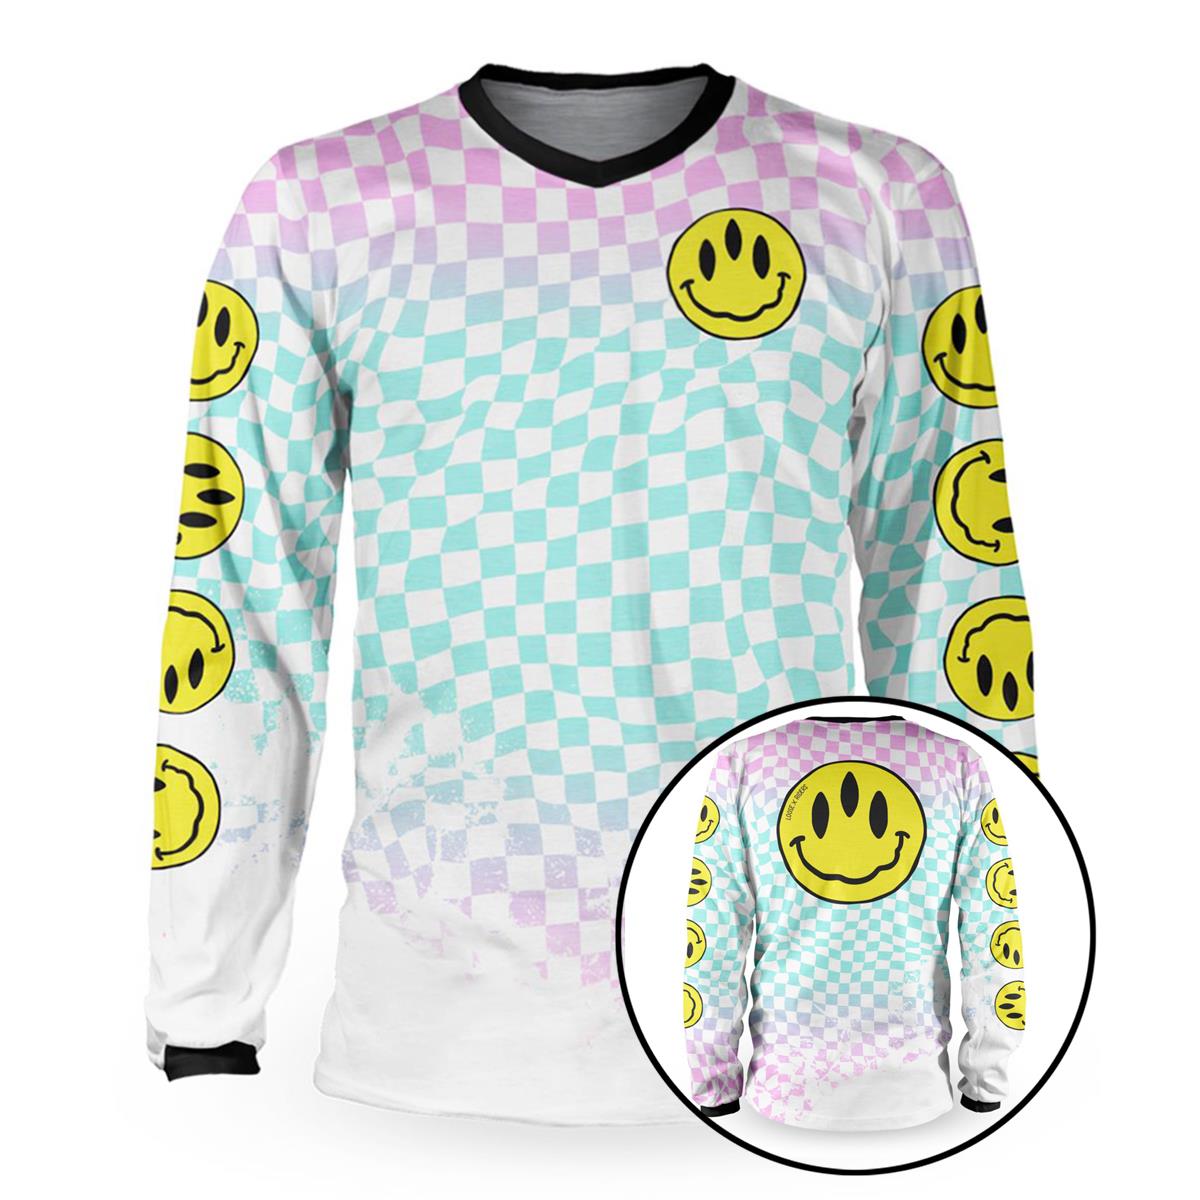 Loose Riders Maillot VTT Manches Longues Cult Of Shred Stoked! 80's White/Turquoise/Pink